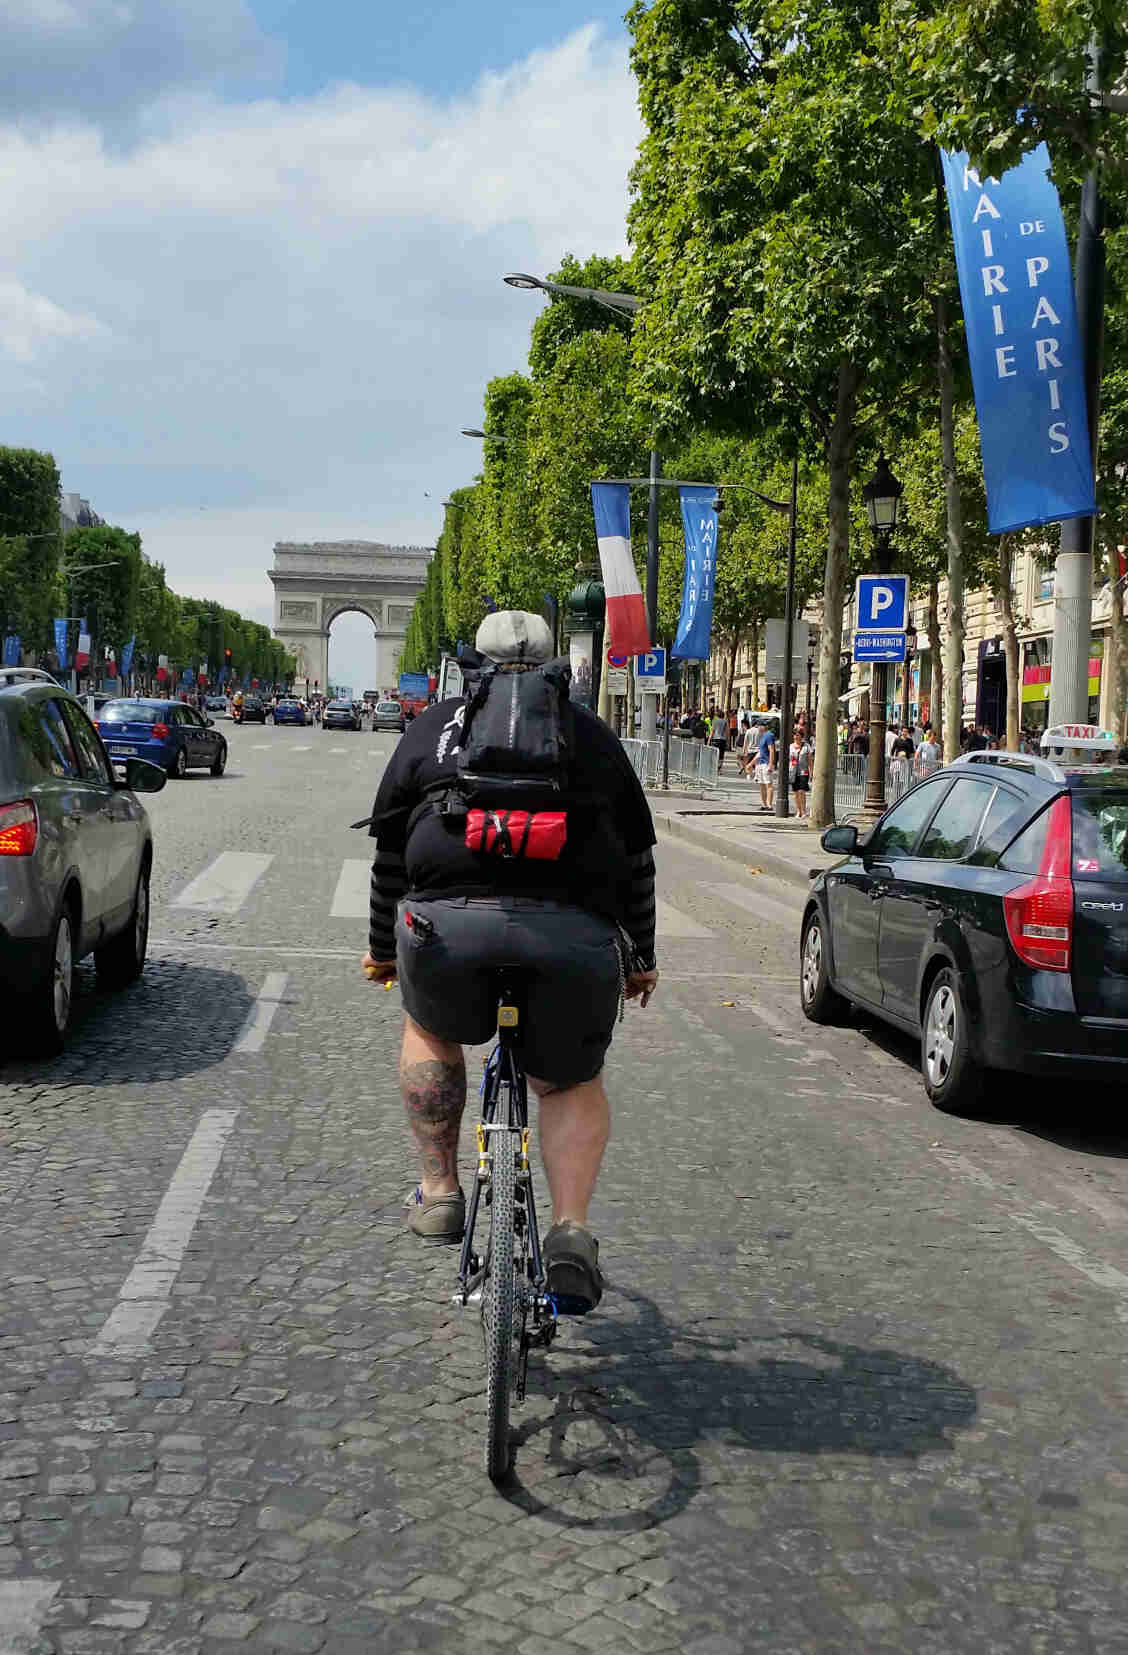 Rear view of a cyclist riding their Surly bike on a street with cars, towards the Arc de Triomphe in Paris